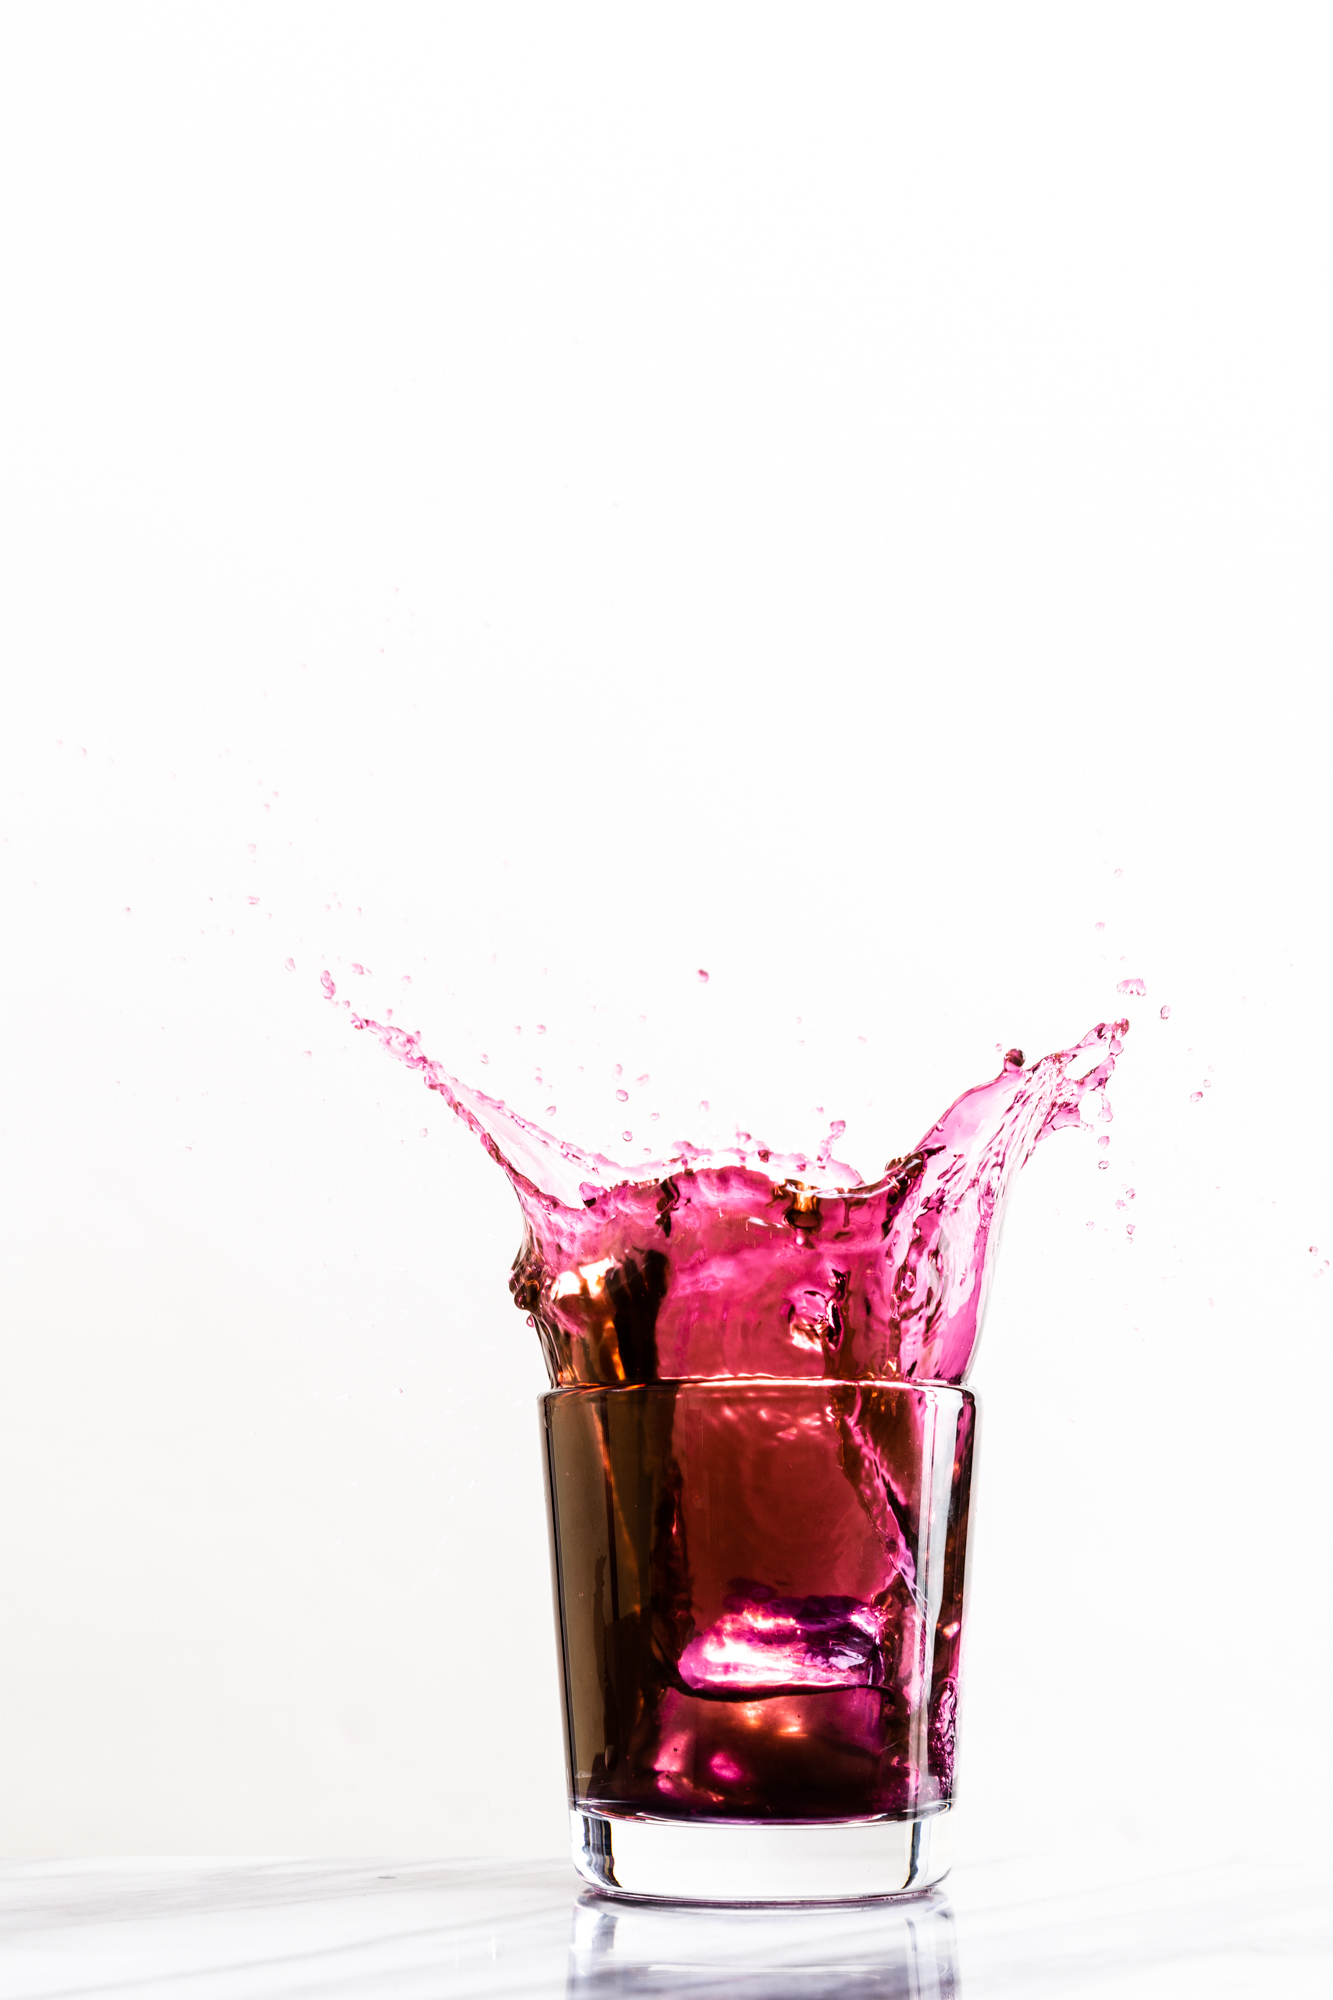 Cocktail splashes out of glass against white background